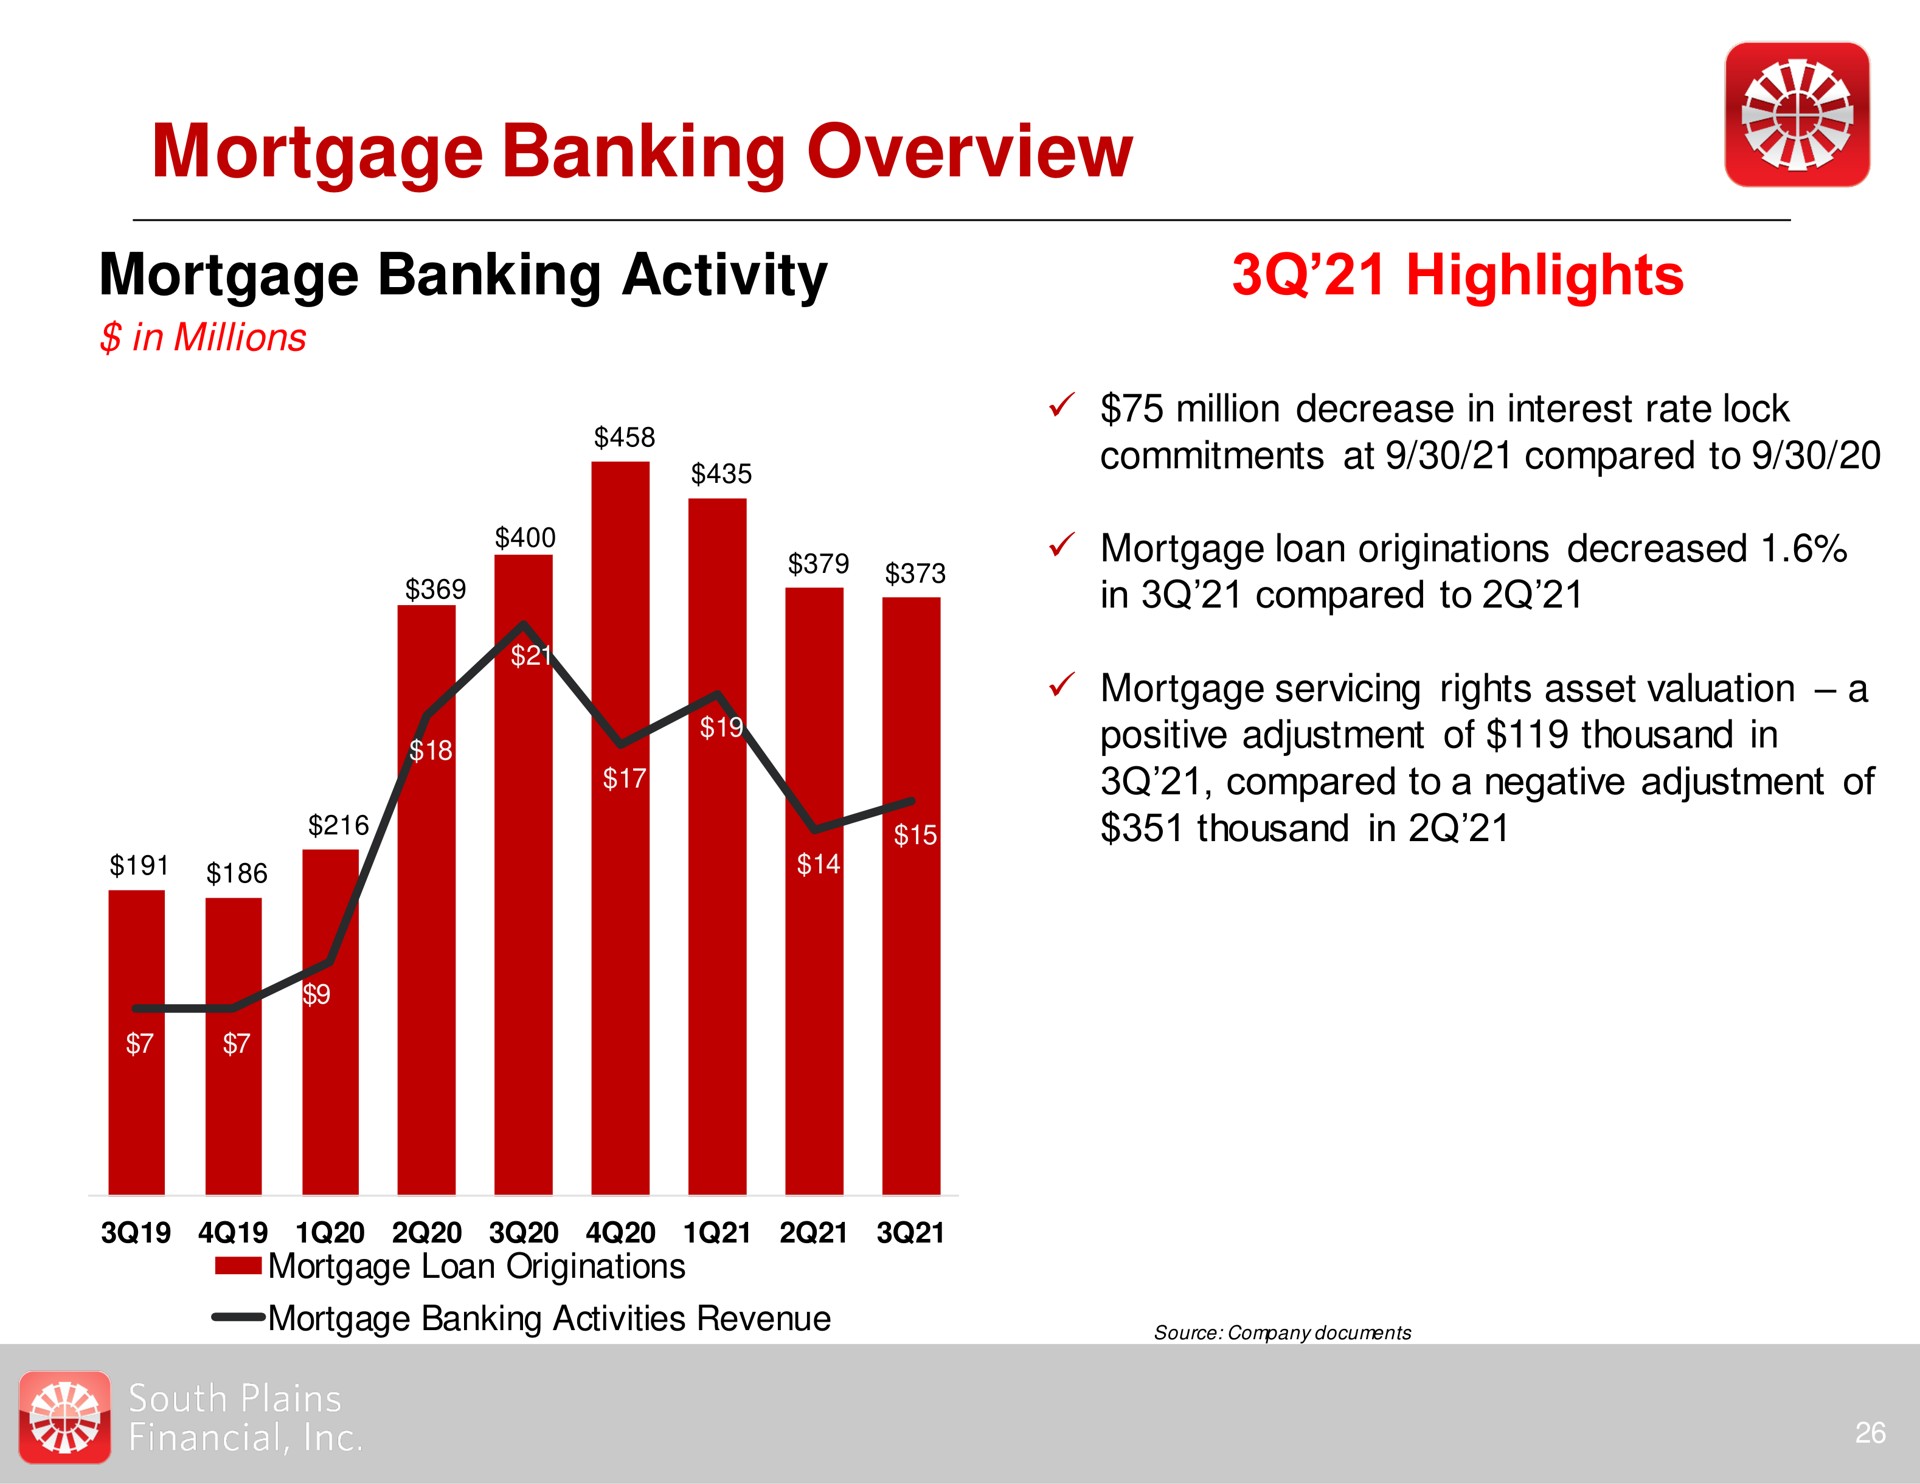 mortgage banking overview mortgage banking activity highlights | South Plains Financial